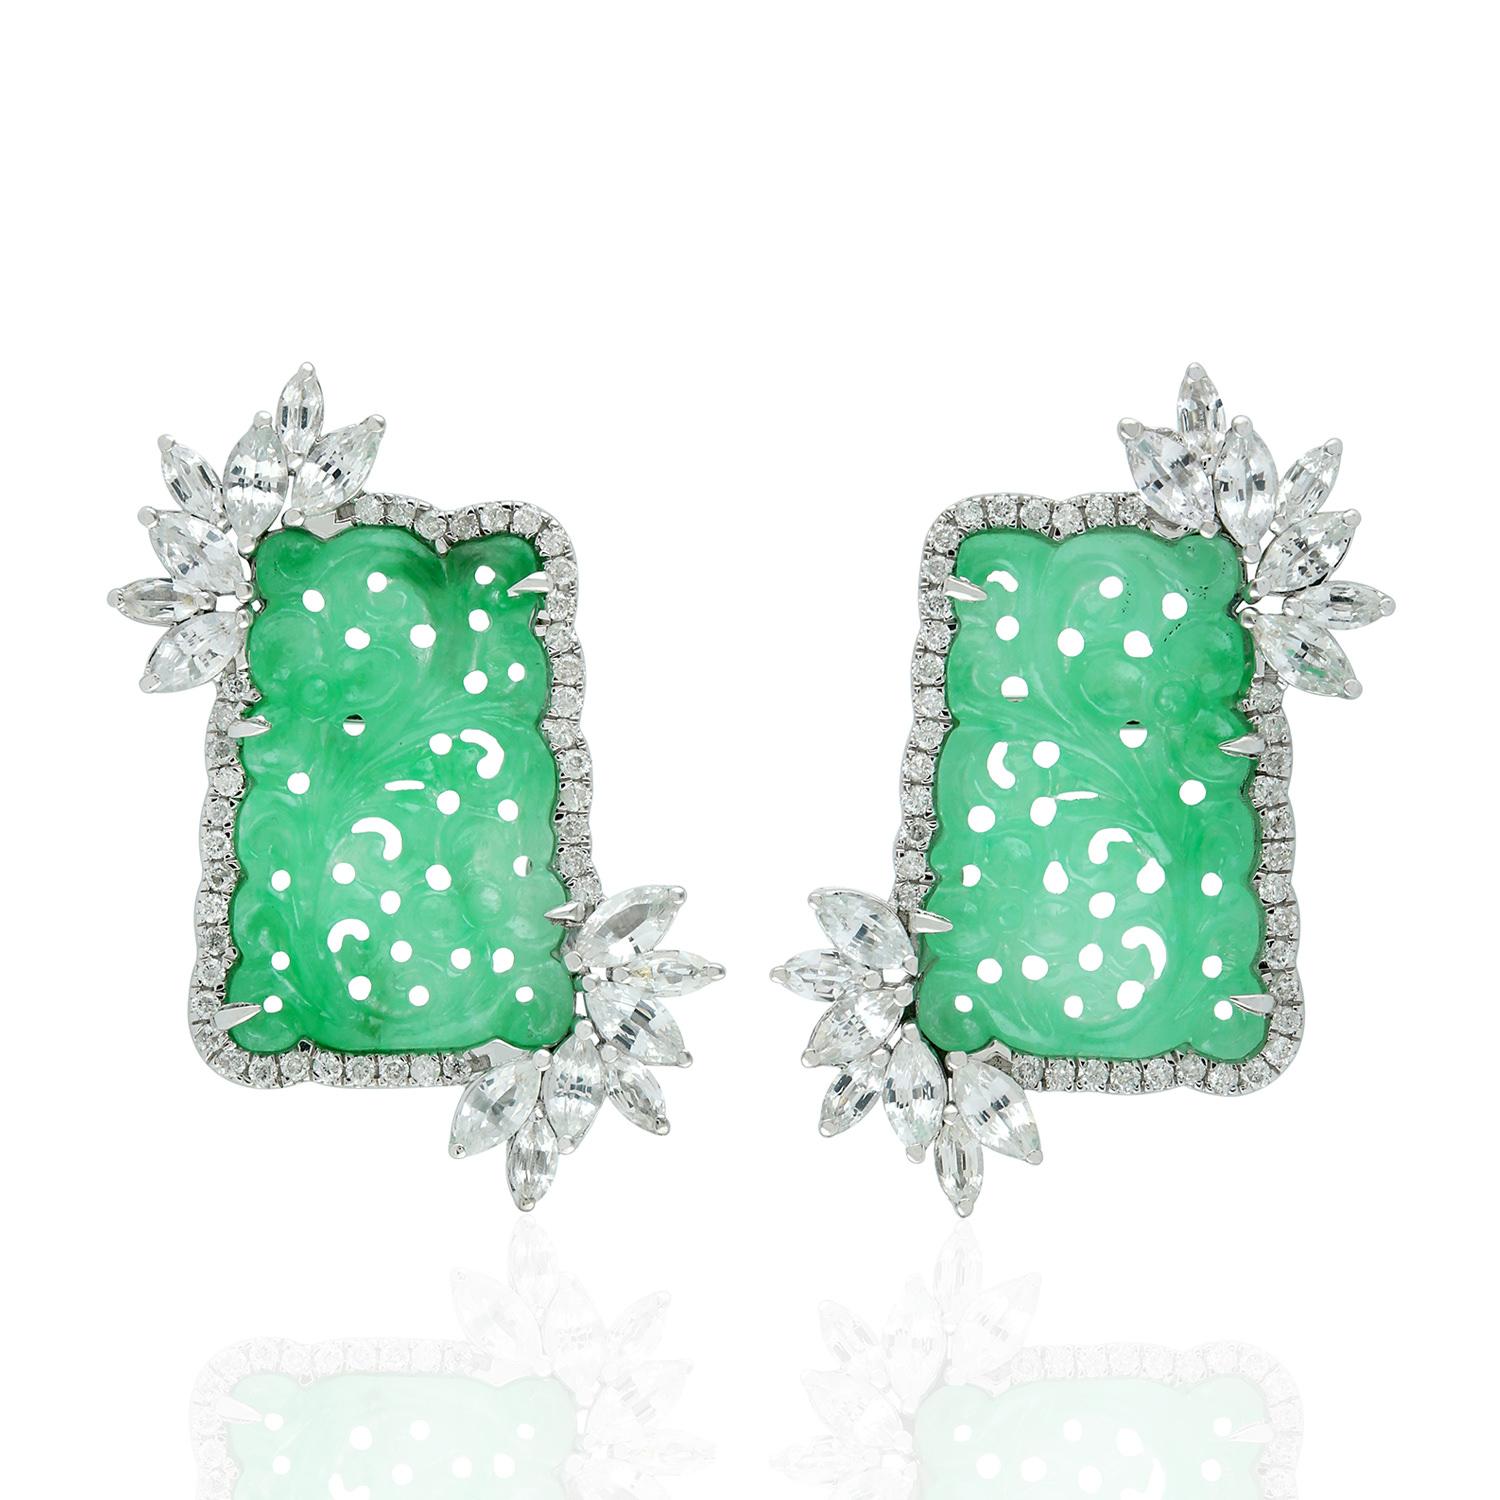 Mixed Cut Carved Jade Stud Earrings With White Sapphire & Diamonds Made In 18k White Gold For Sale